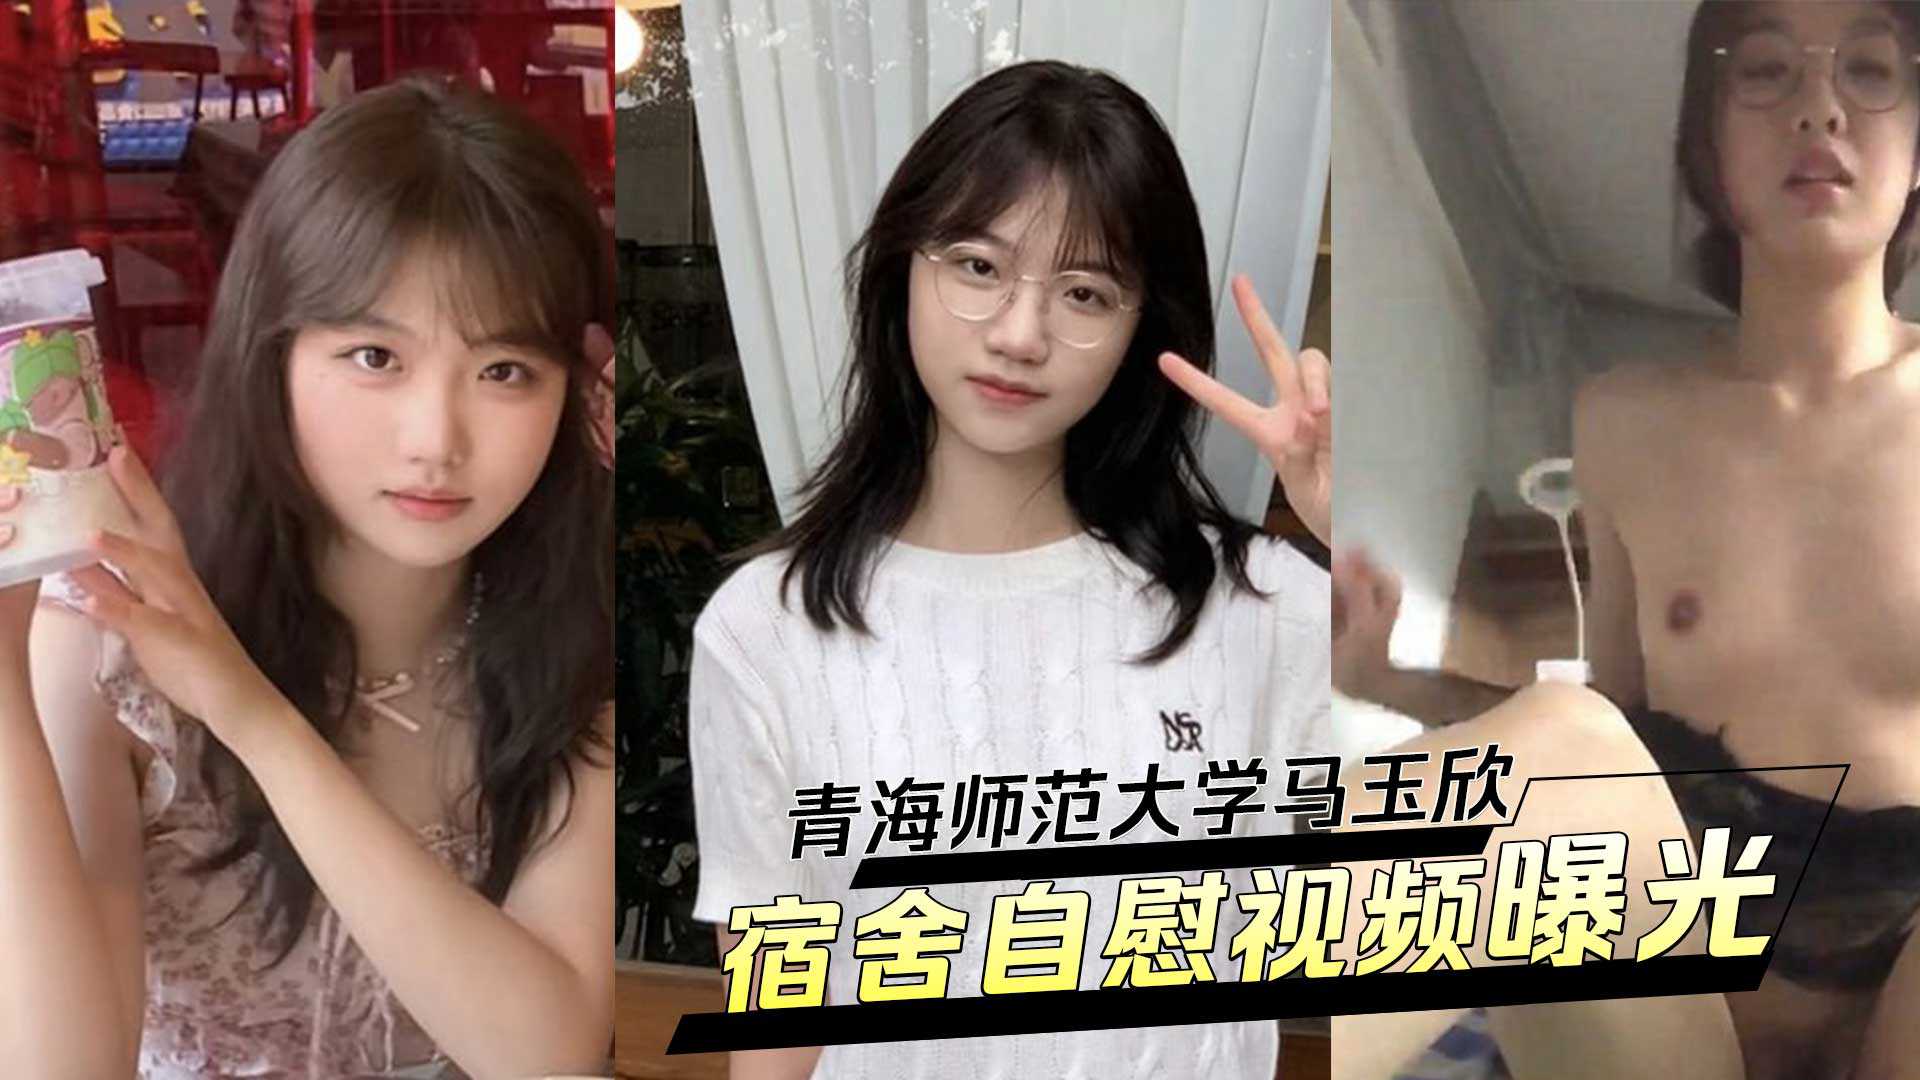 Qingdao Teacher范 University Ma Yuhyun, clean school flowers turned into the opposite! exhibited by a boyfriend to train a dormitory masturbation video!